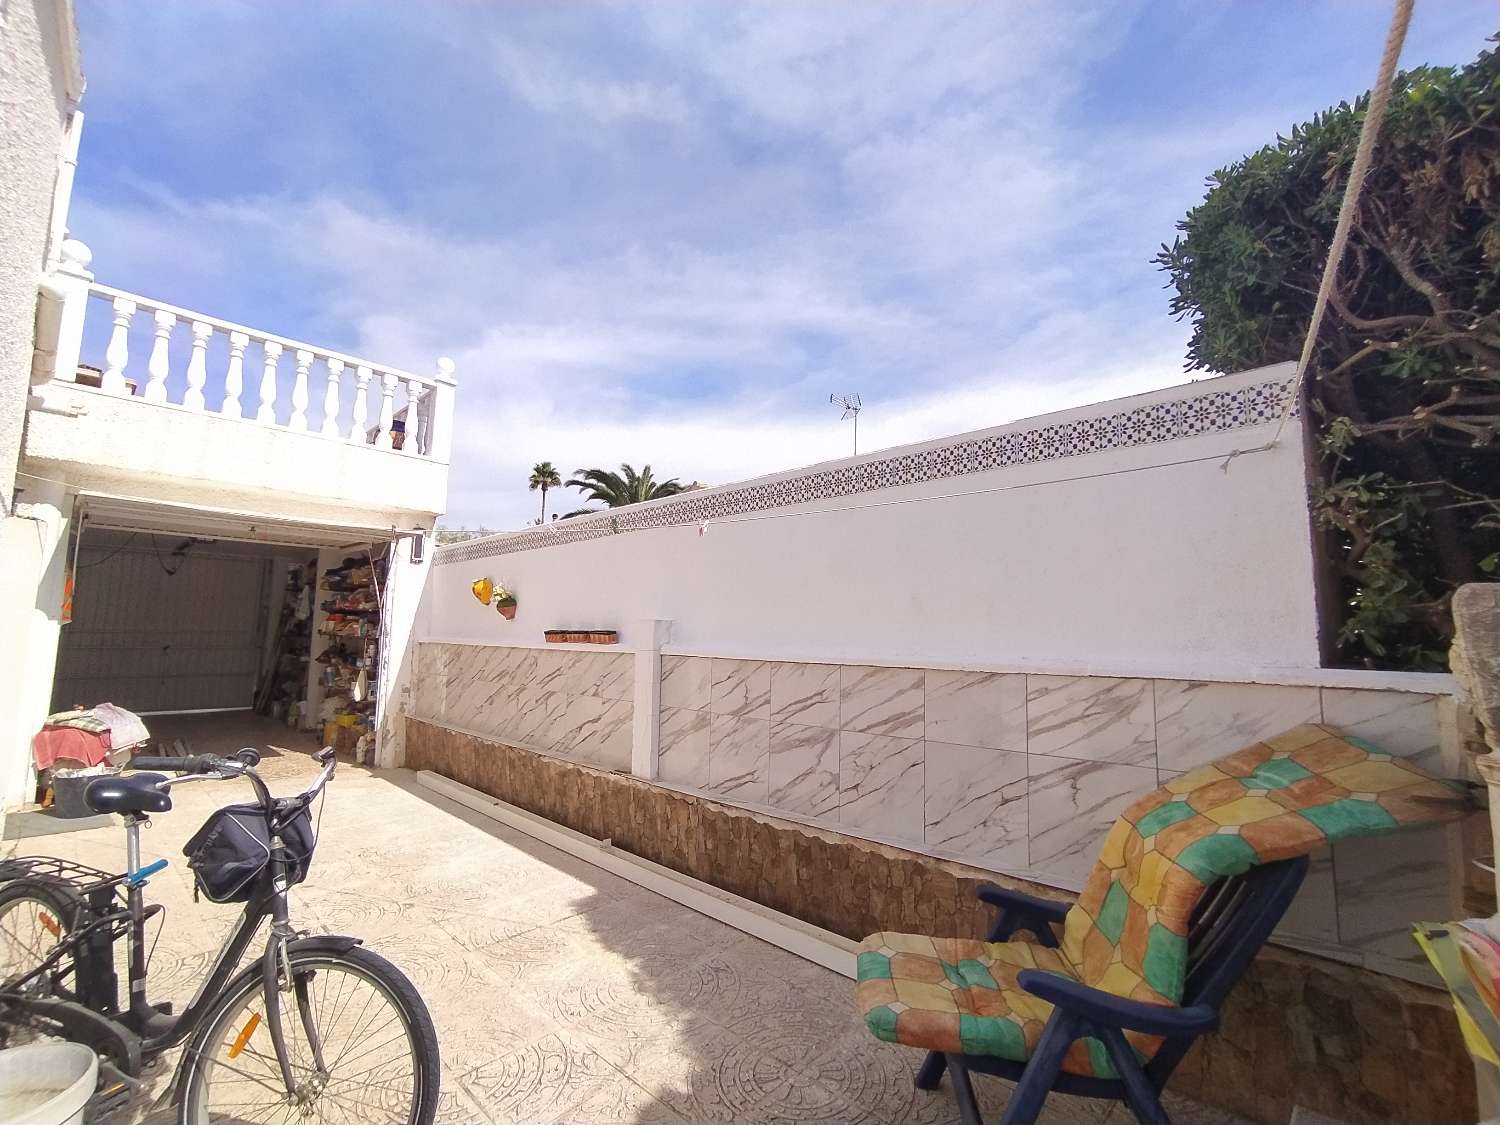 Semi-detached villa with 3 bedrooms and 2 bathrooms with separate apartment